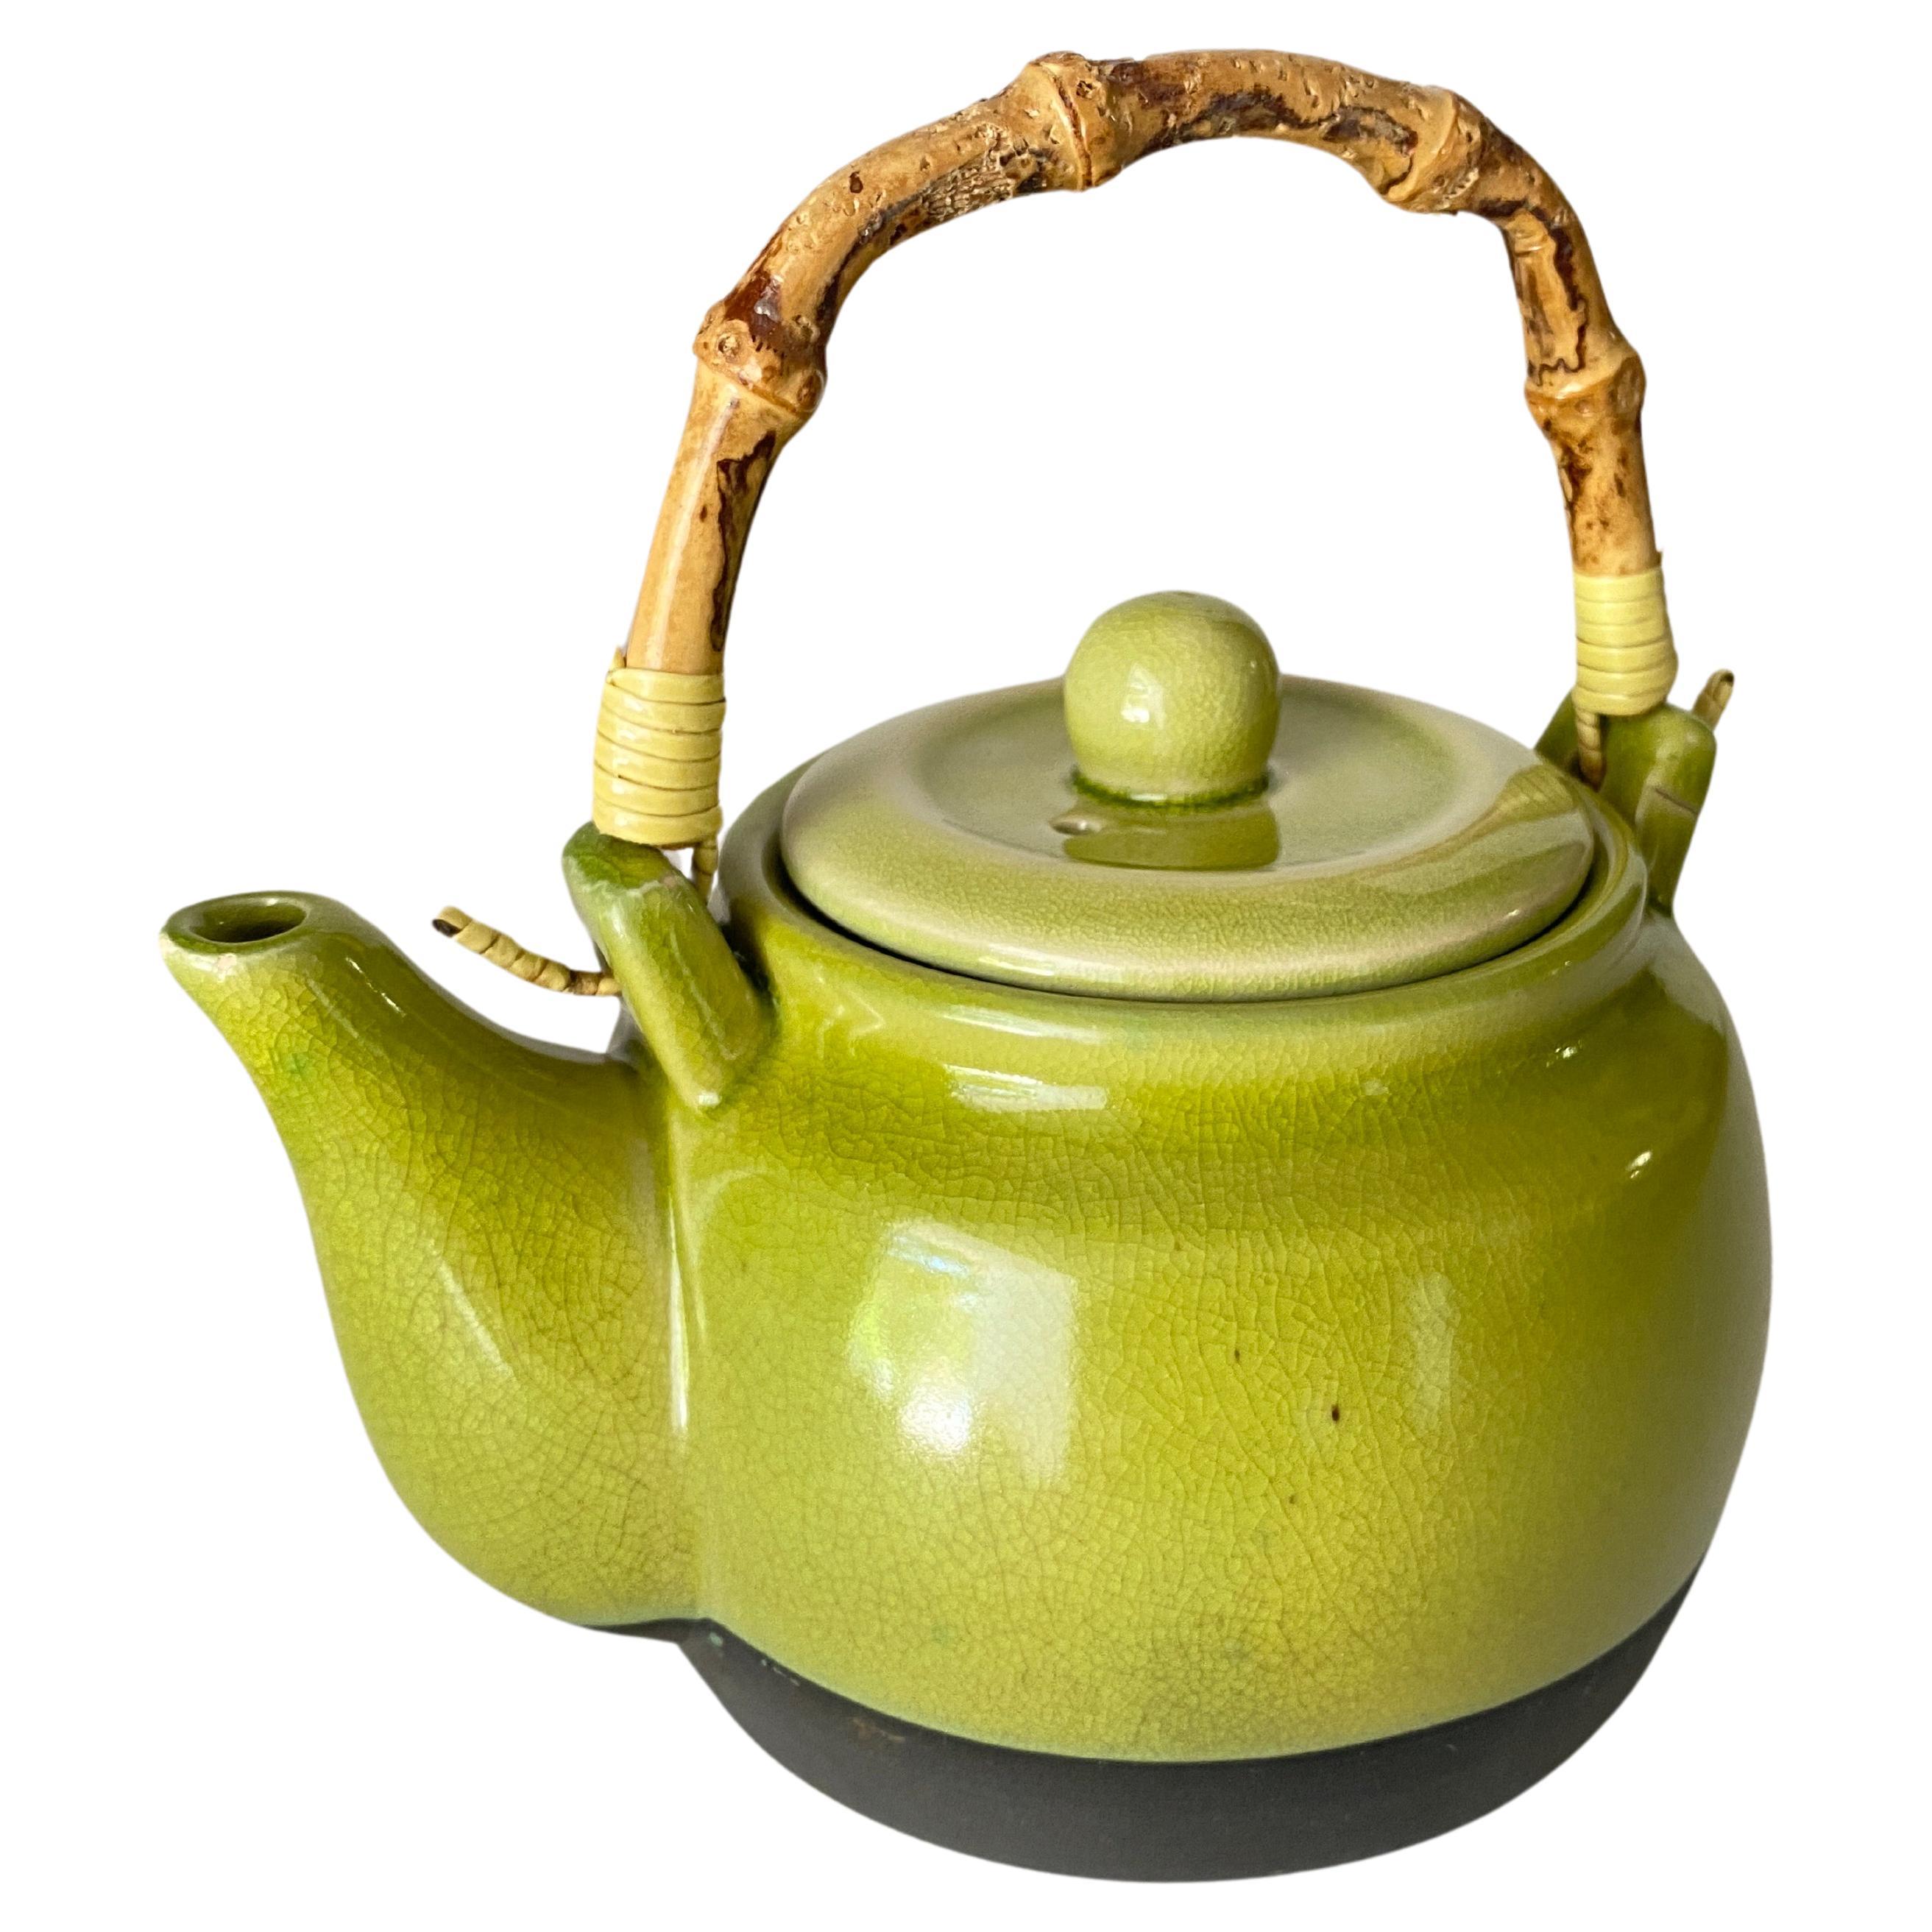 Crakeled Ceramic Tea Pot Attributed Green Color 20 th Century France For Sale